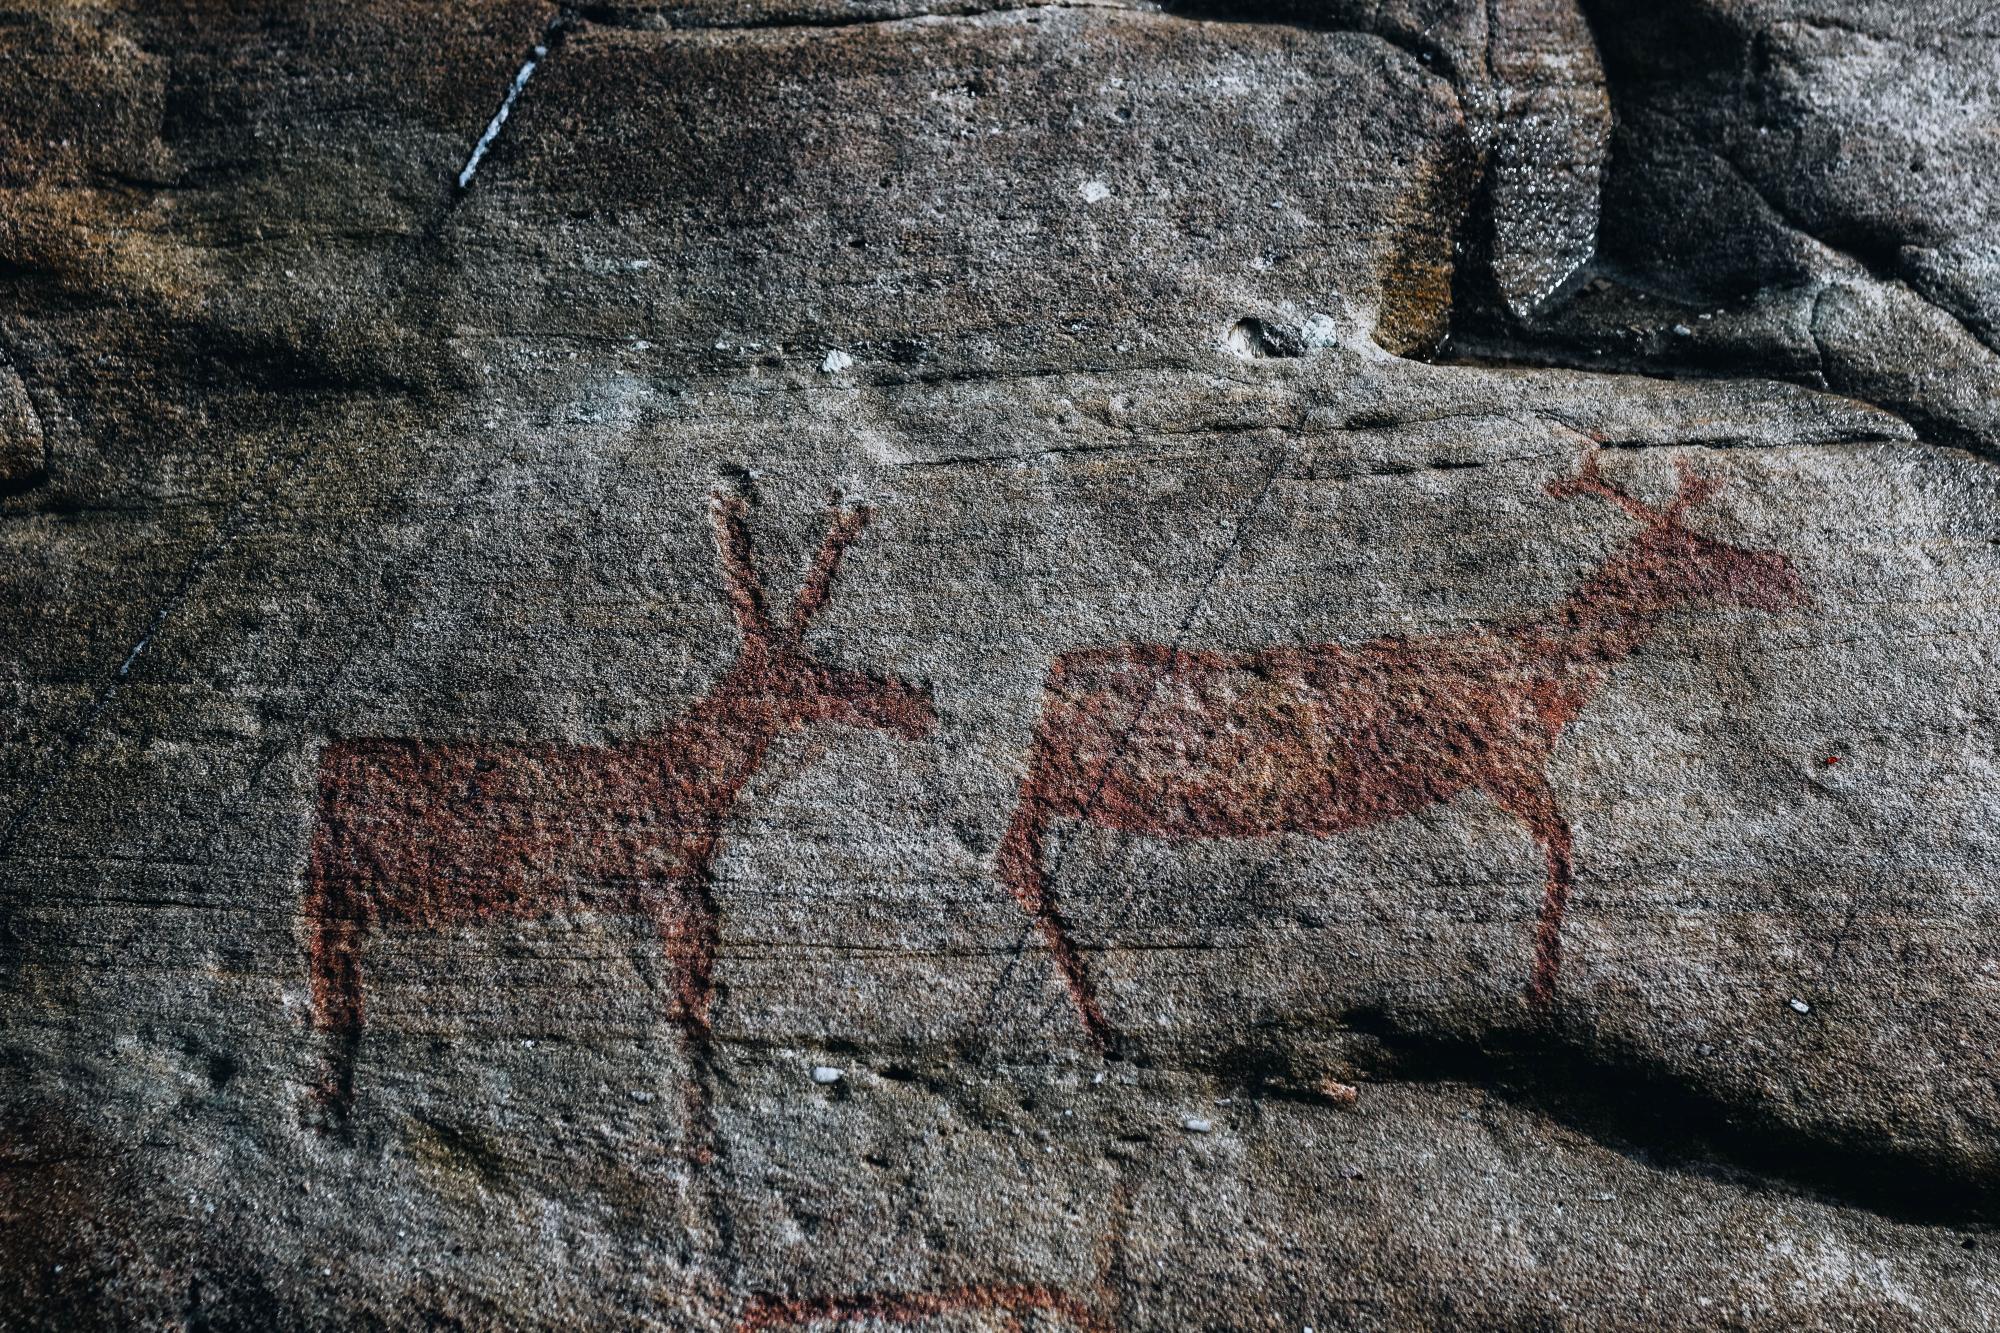 Guided tour to the rock carvings in Vingen